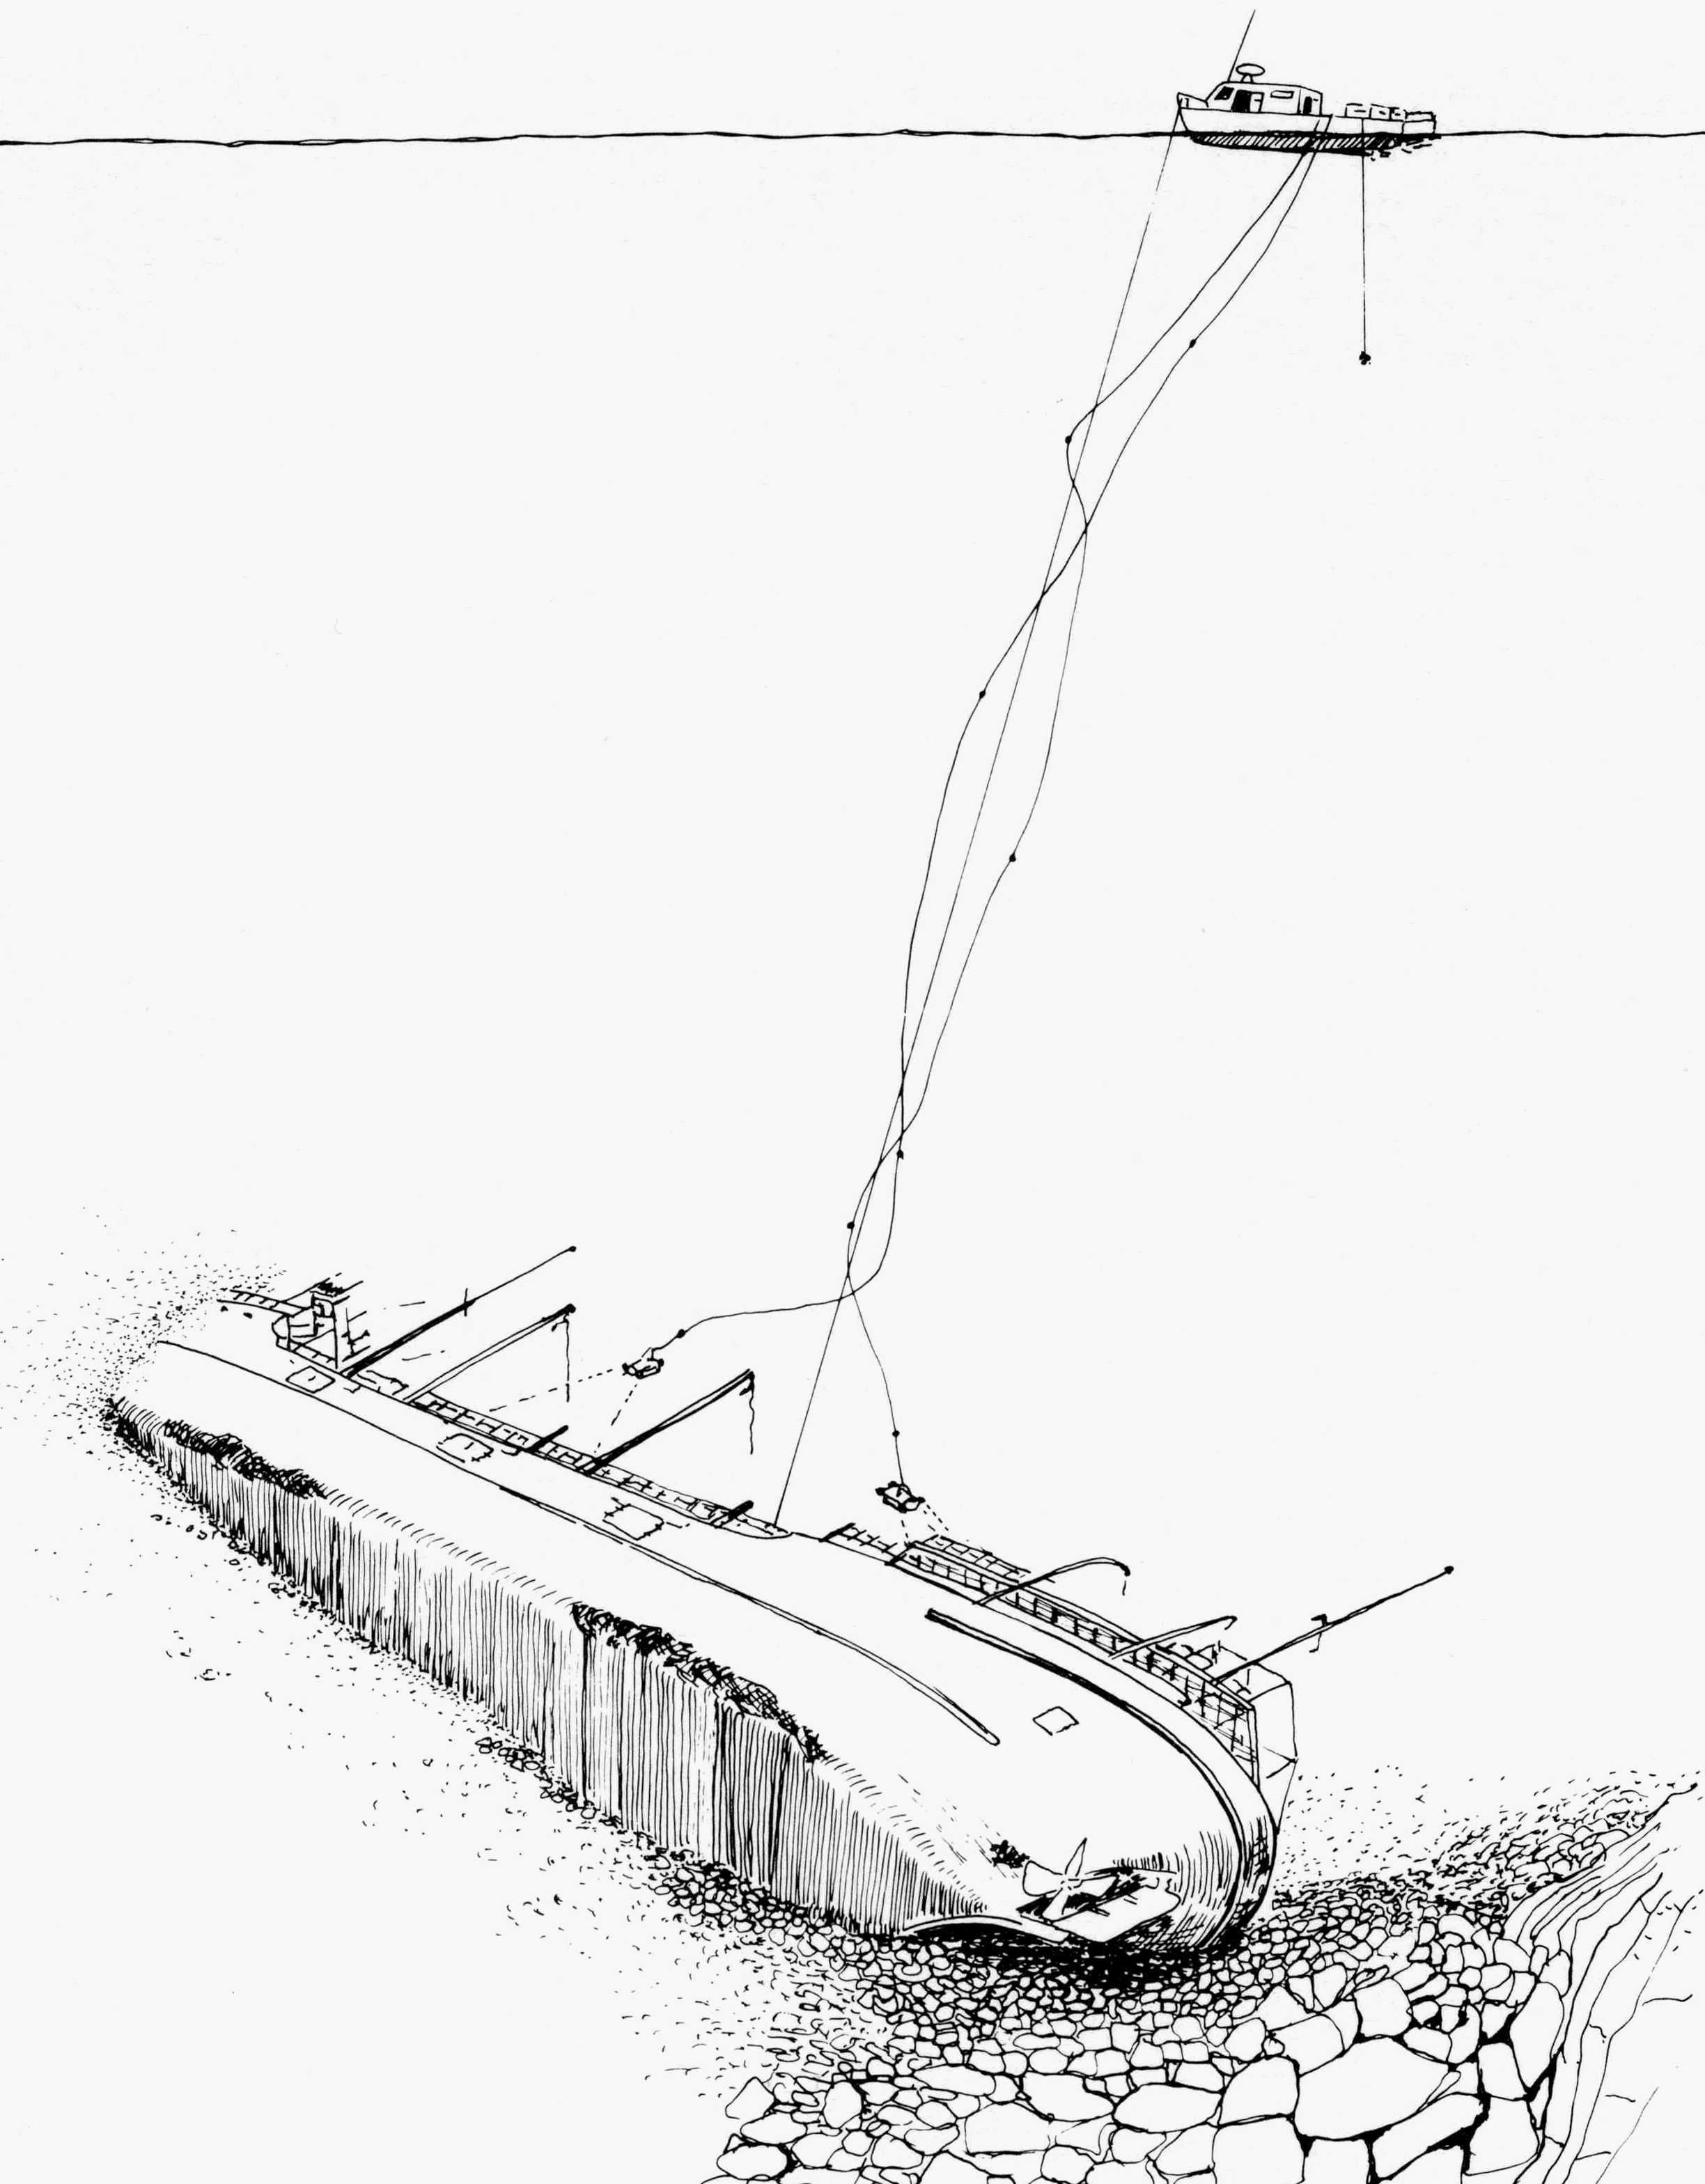 lakebed sketch of the SS Kamloops shipwreck